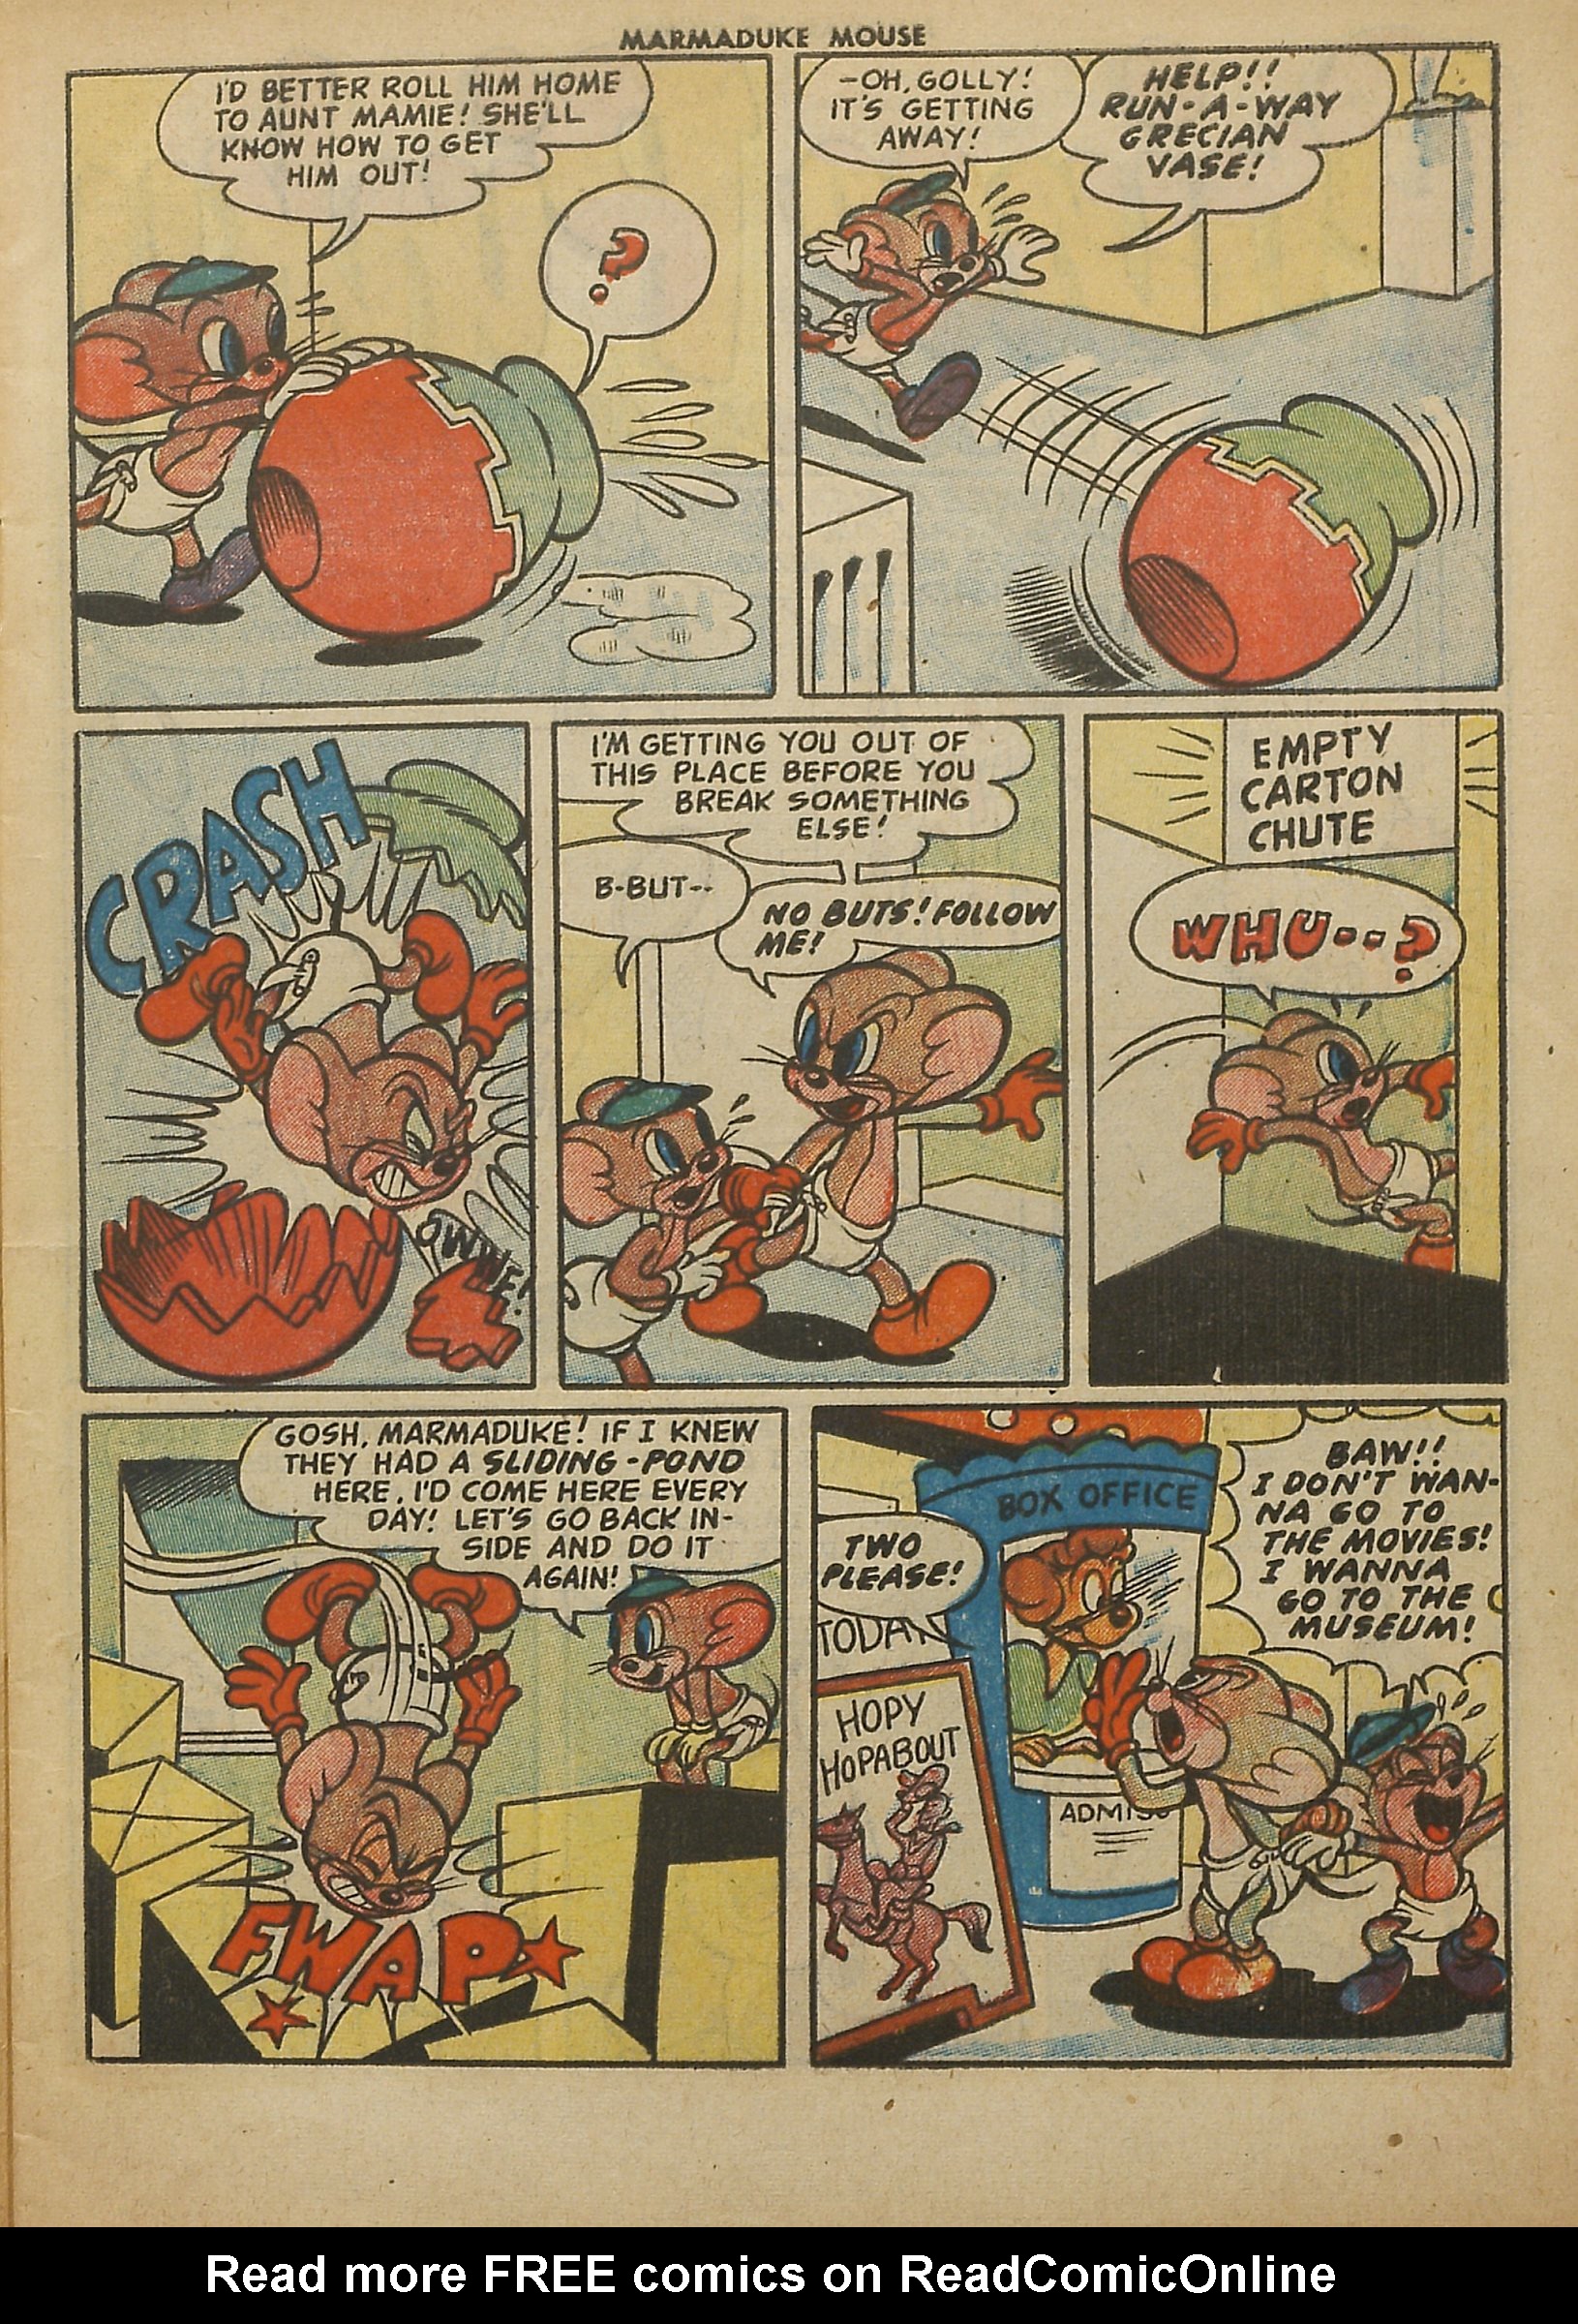 Read online Marmaduke Mouse comic -  Issue #48 - 7